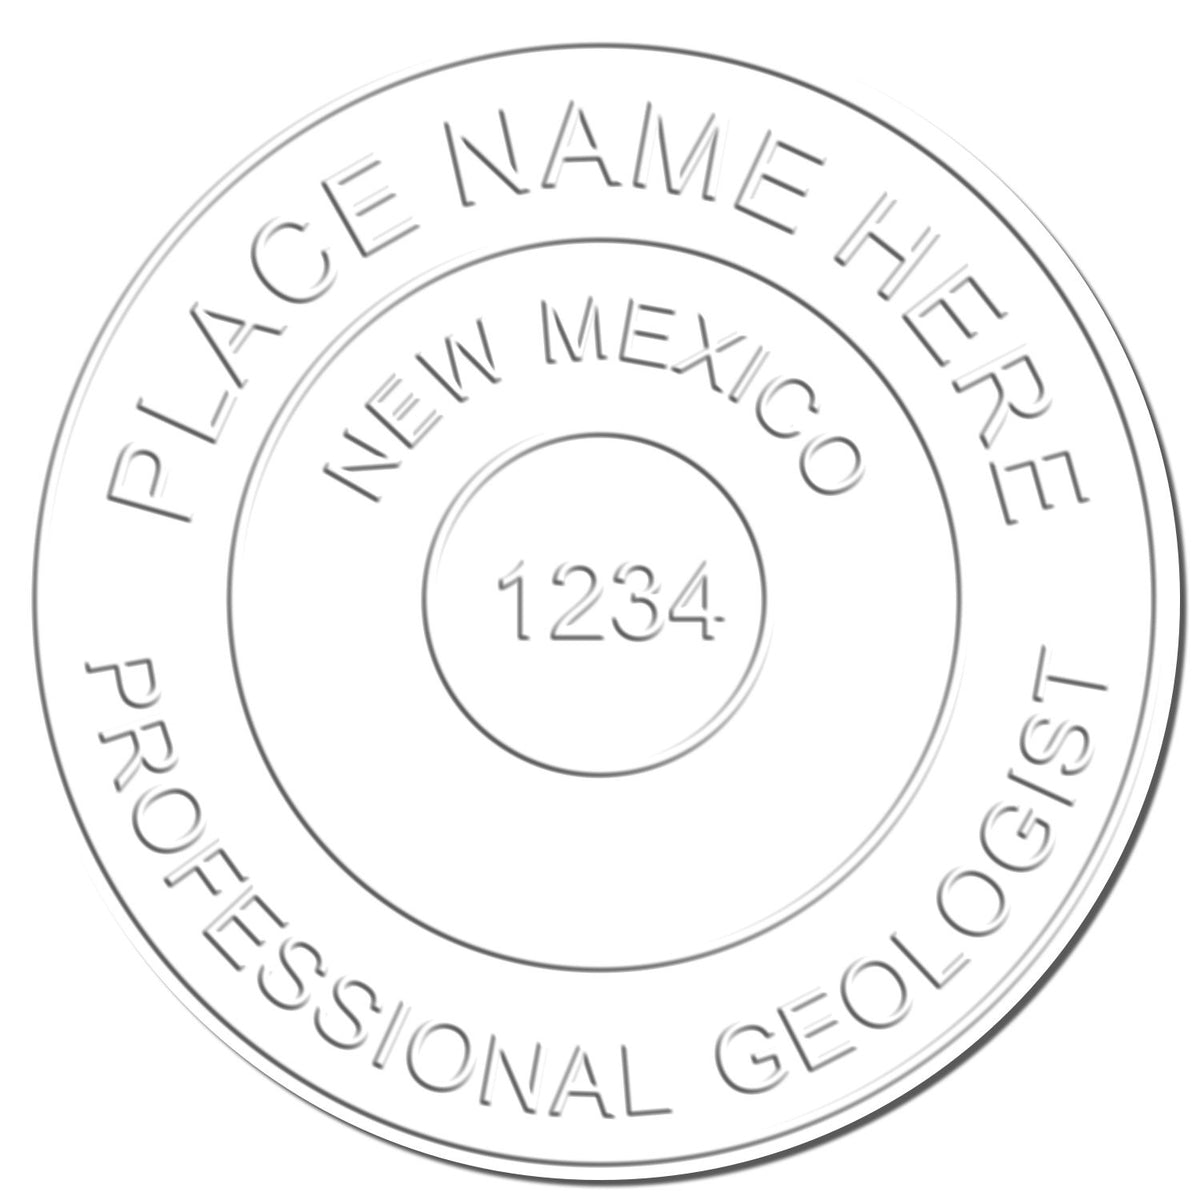 The New Mexico Geologist Desk Seal stamp impression comes to life with a crisp, detailed image stamped on paper - showcasing true professional quality.